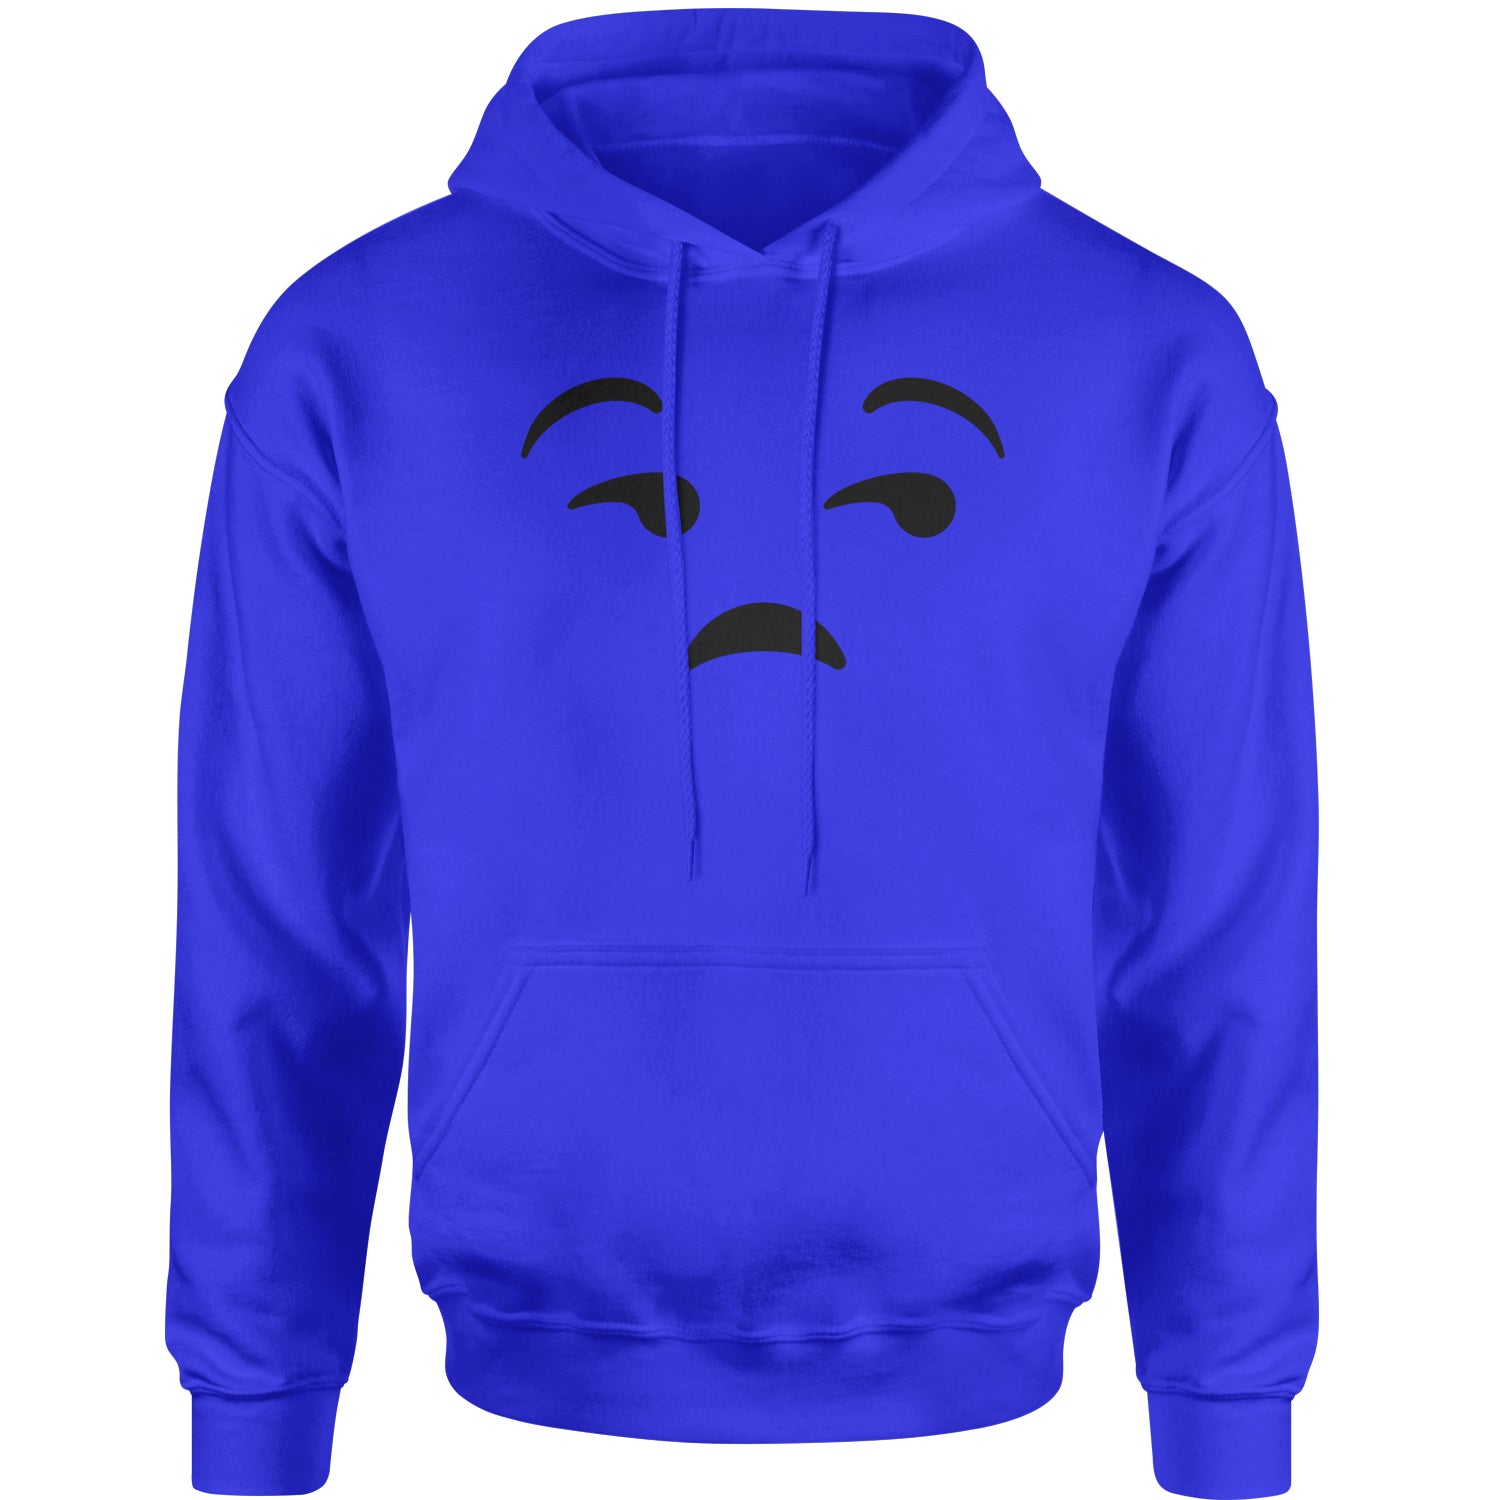 Emoticon Whatever Smile Face Adult Hoodie Sweatshirt cosplay, costume, dress, emoji, emote, face, halloween, smiley, up, yellow by Expression Tees